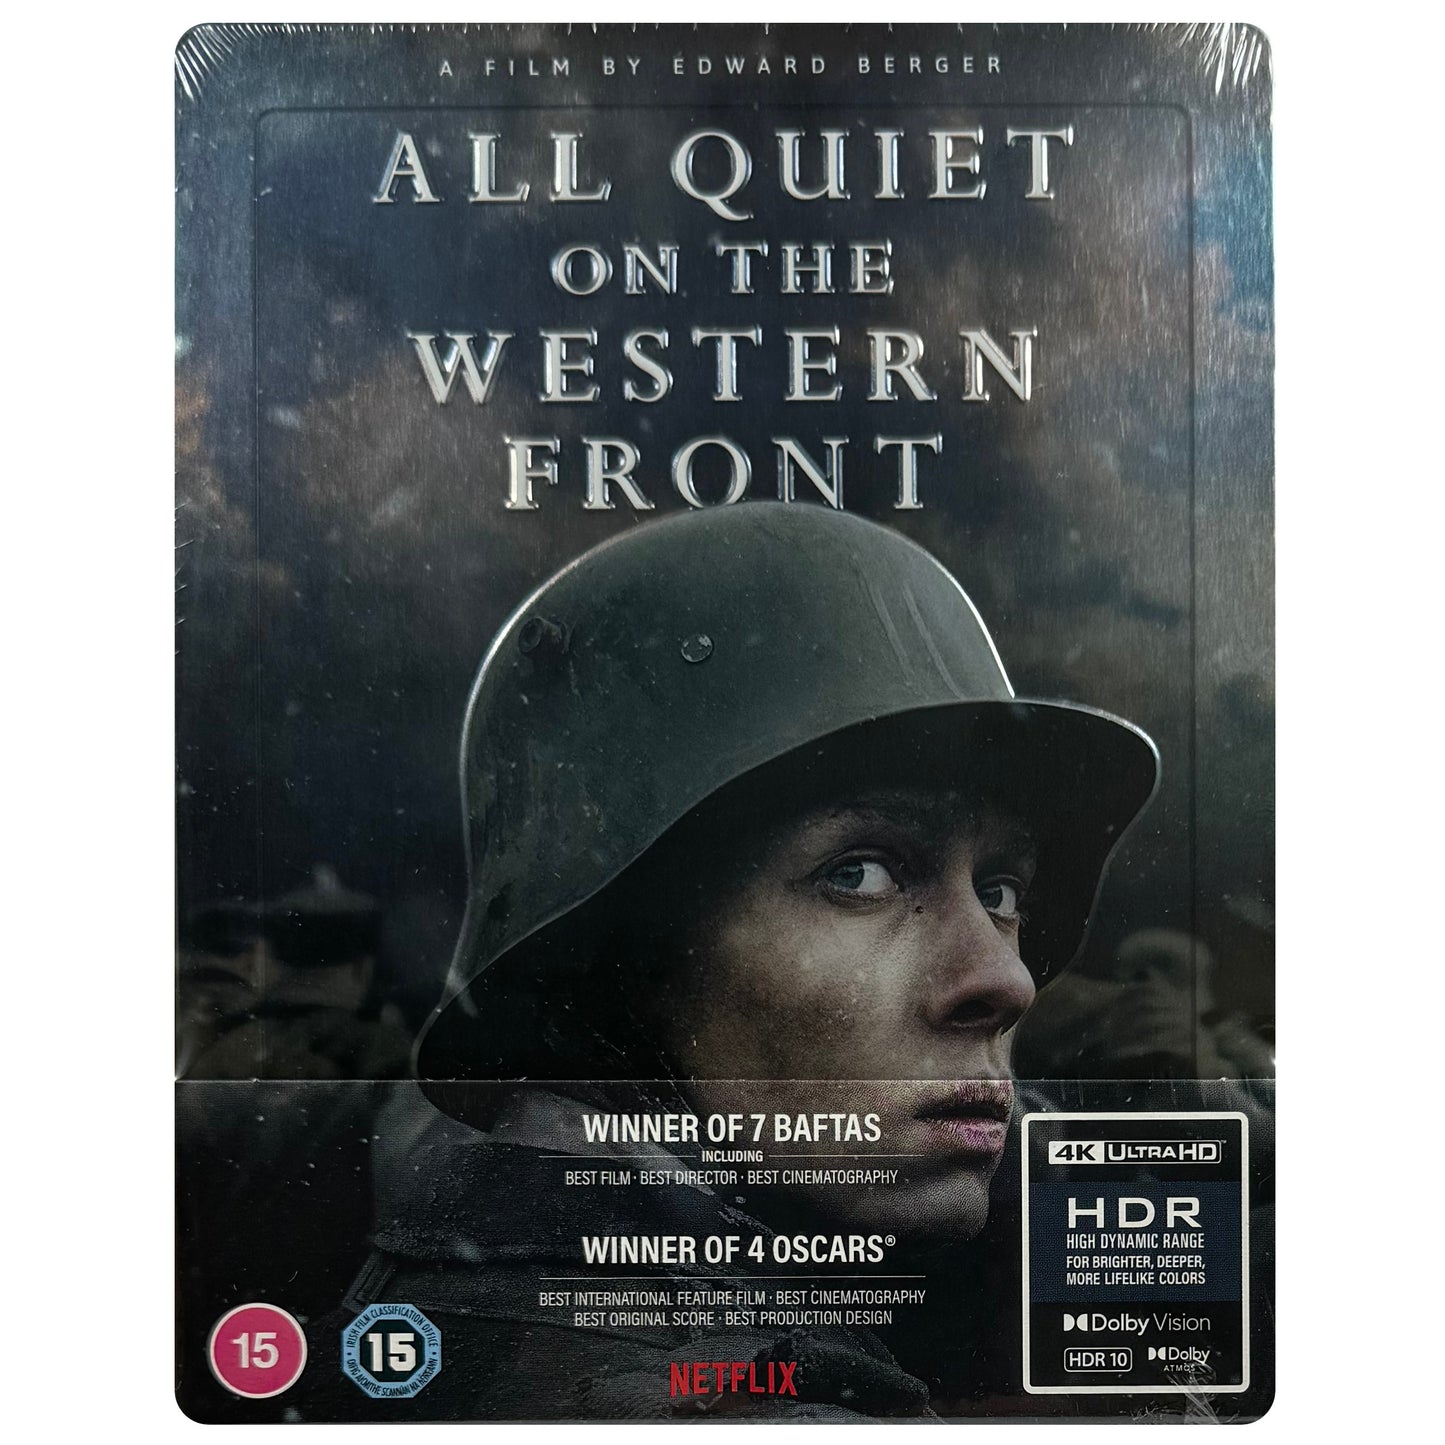 All Quiet on the Western Front 4K Steelbook